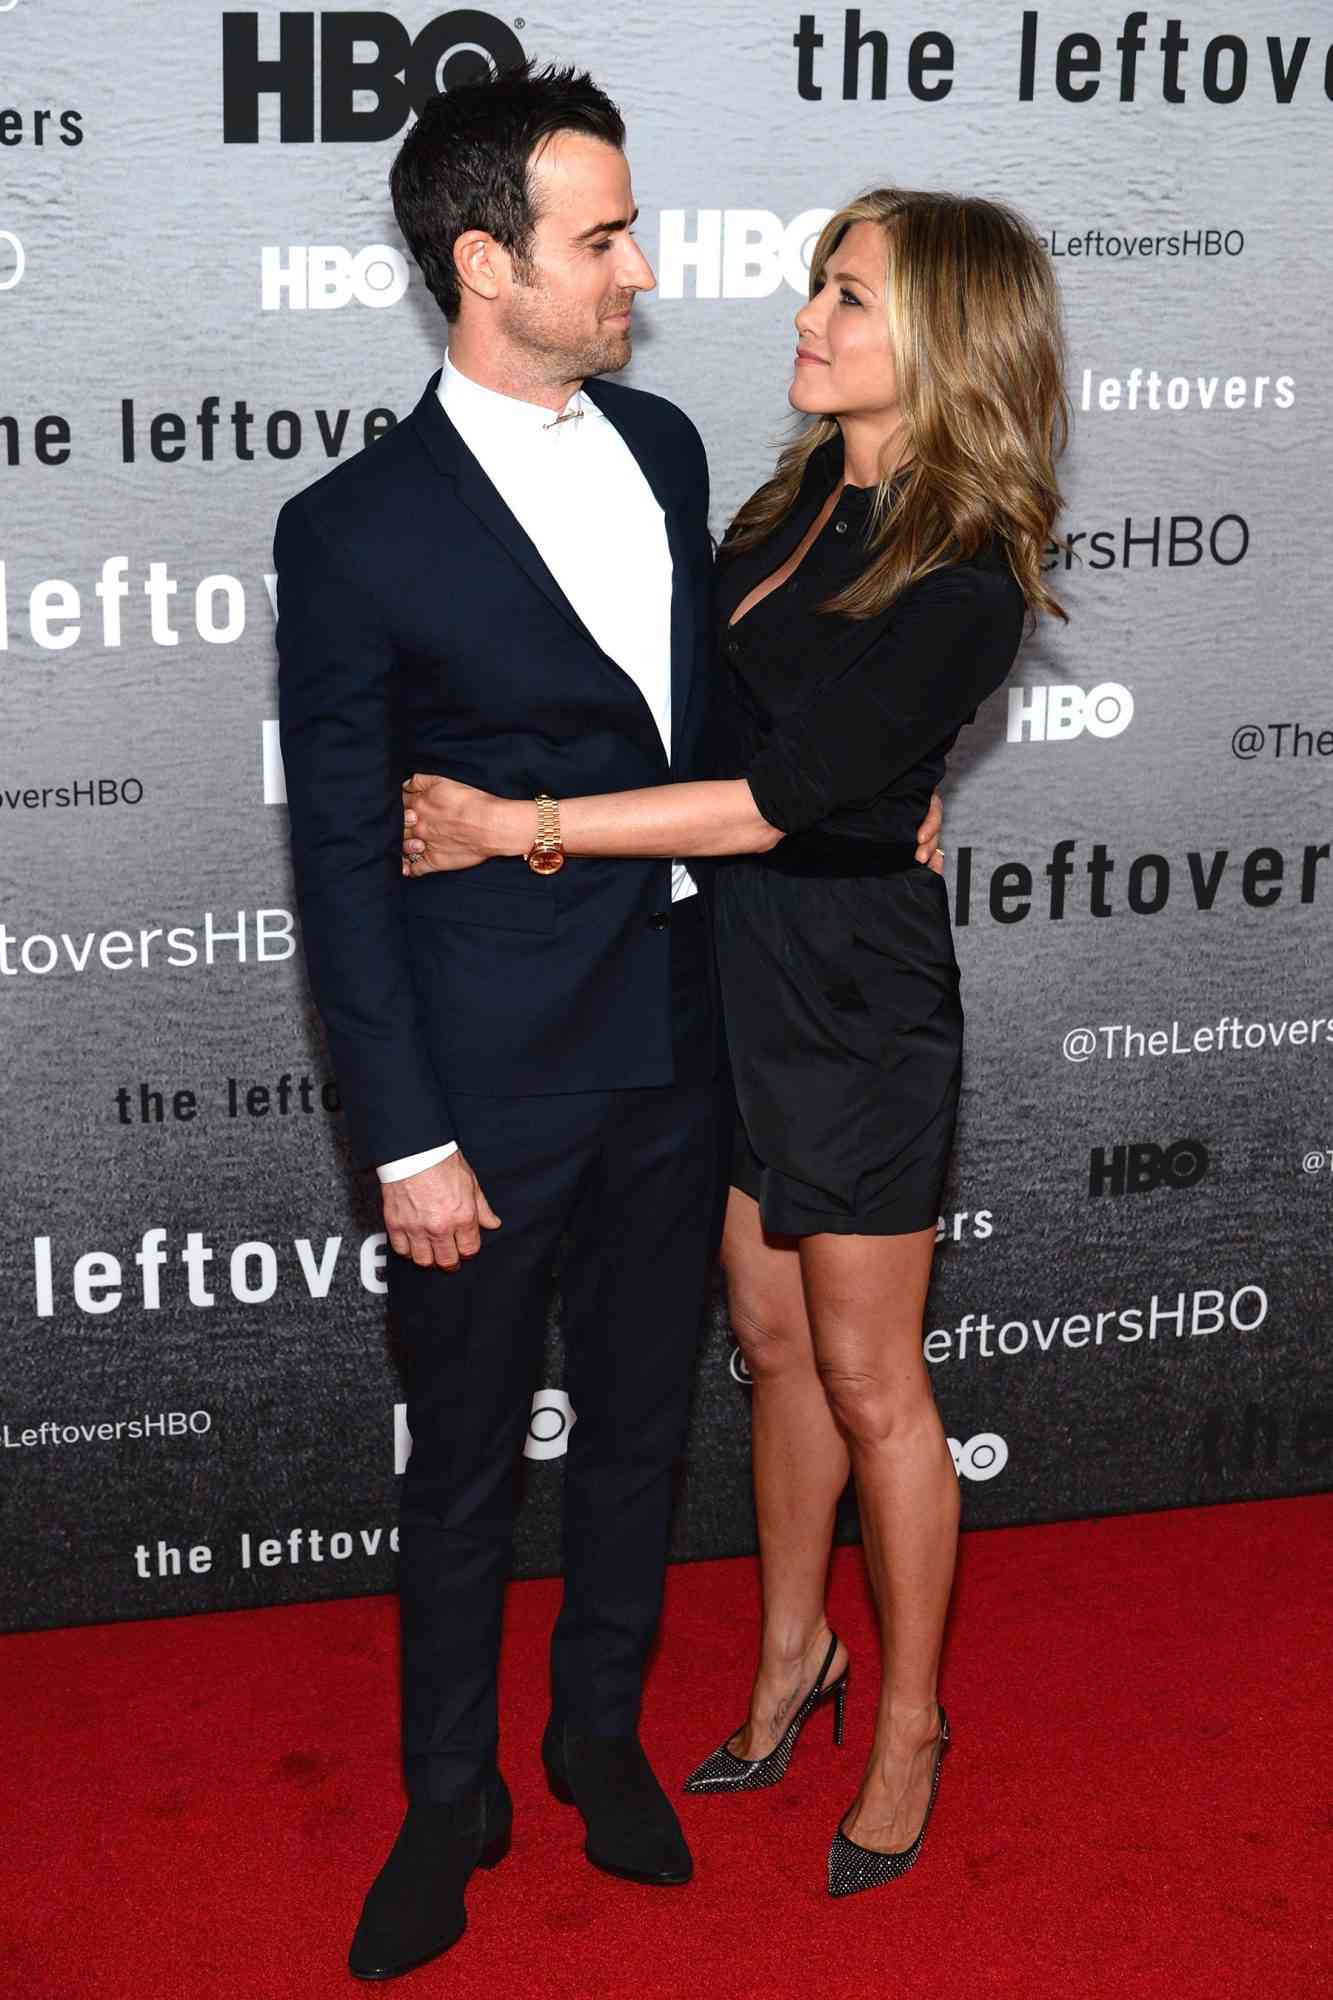 Justin Theroux and Jennifer Aniston at The Leftovers' premiere in New York City&nbsp;on June 23, 2014